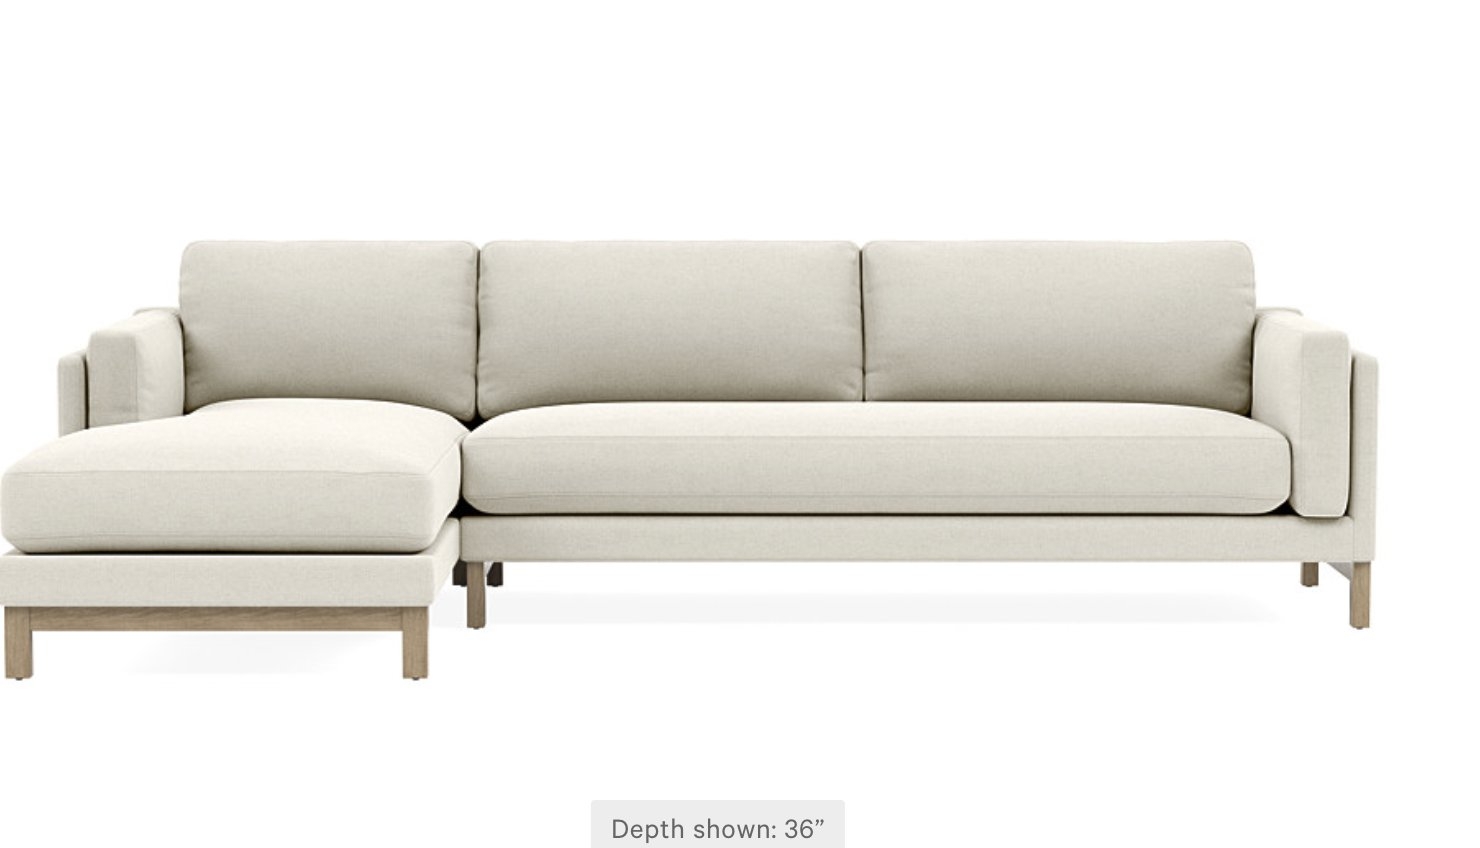 Gaby 3 piece Left Bumper Sectional with White Chalk Fabric, down alternative cushions, and White Wash Oak single rail legs - Image 1